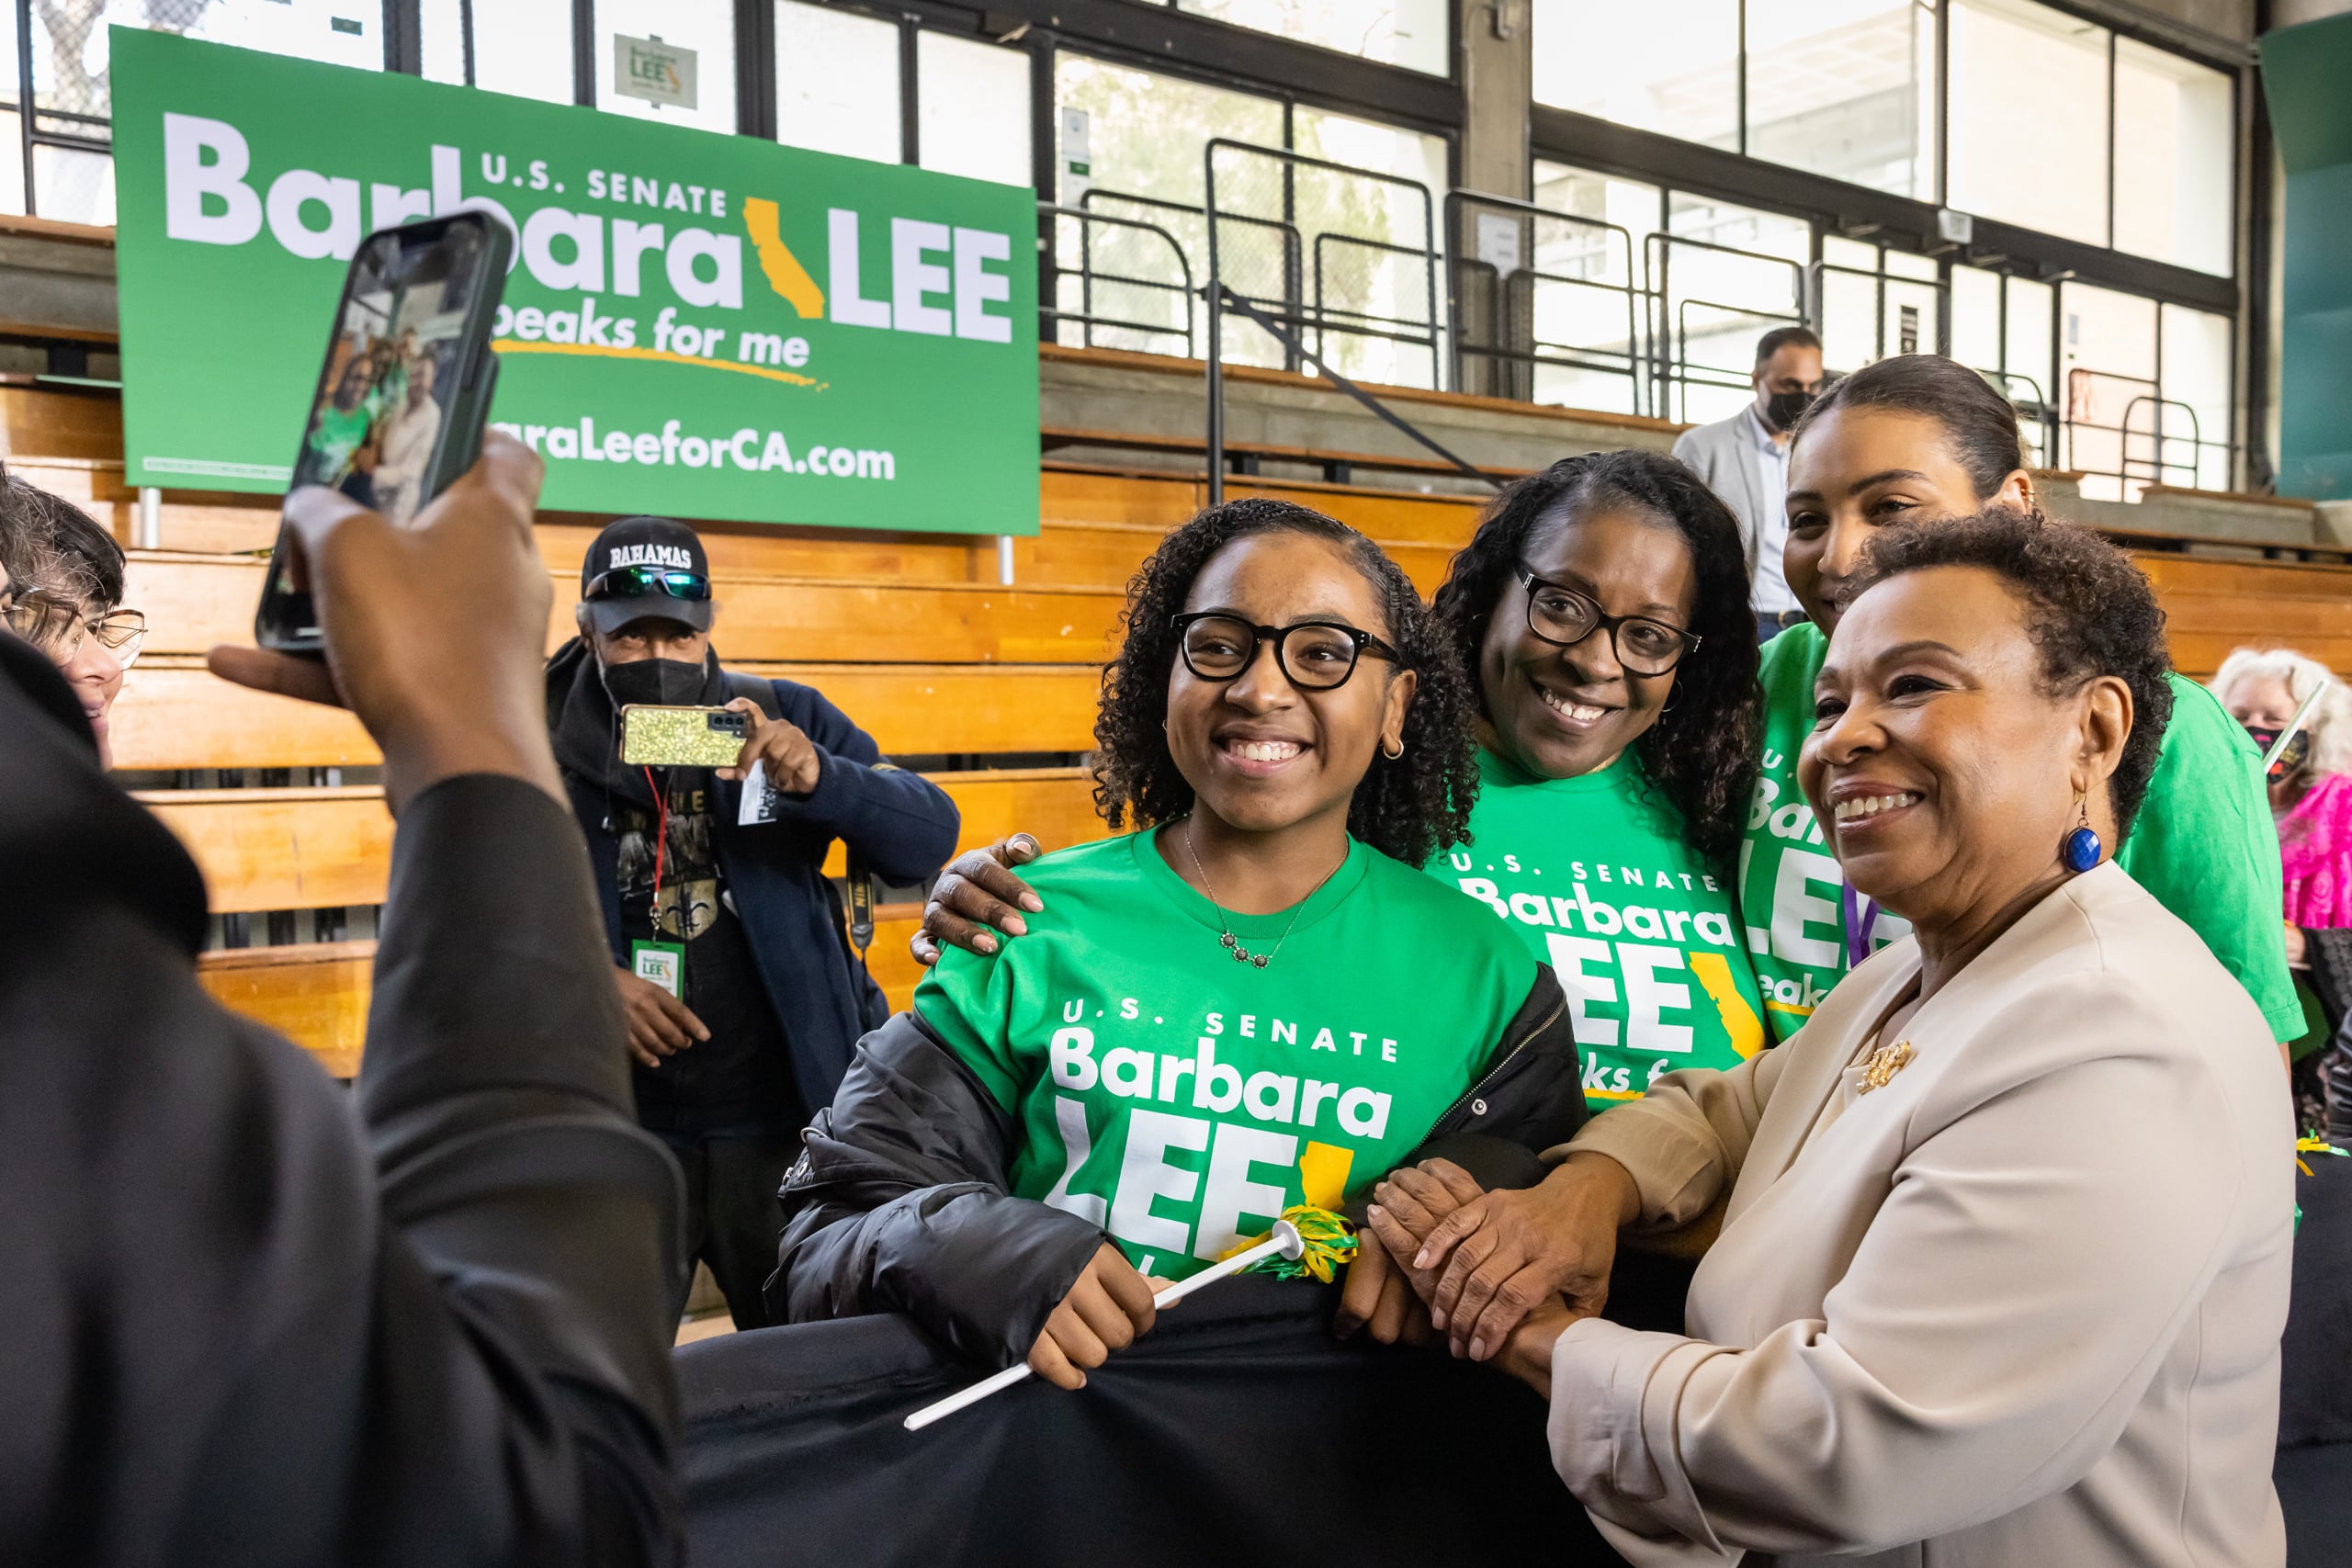 Barbara Lee takes photo with supporters